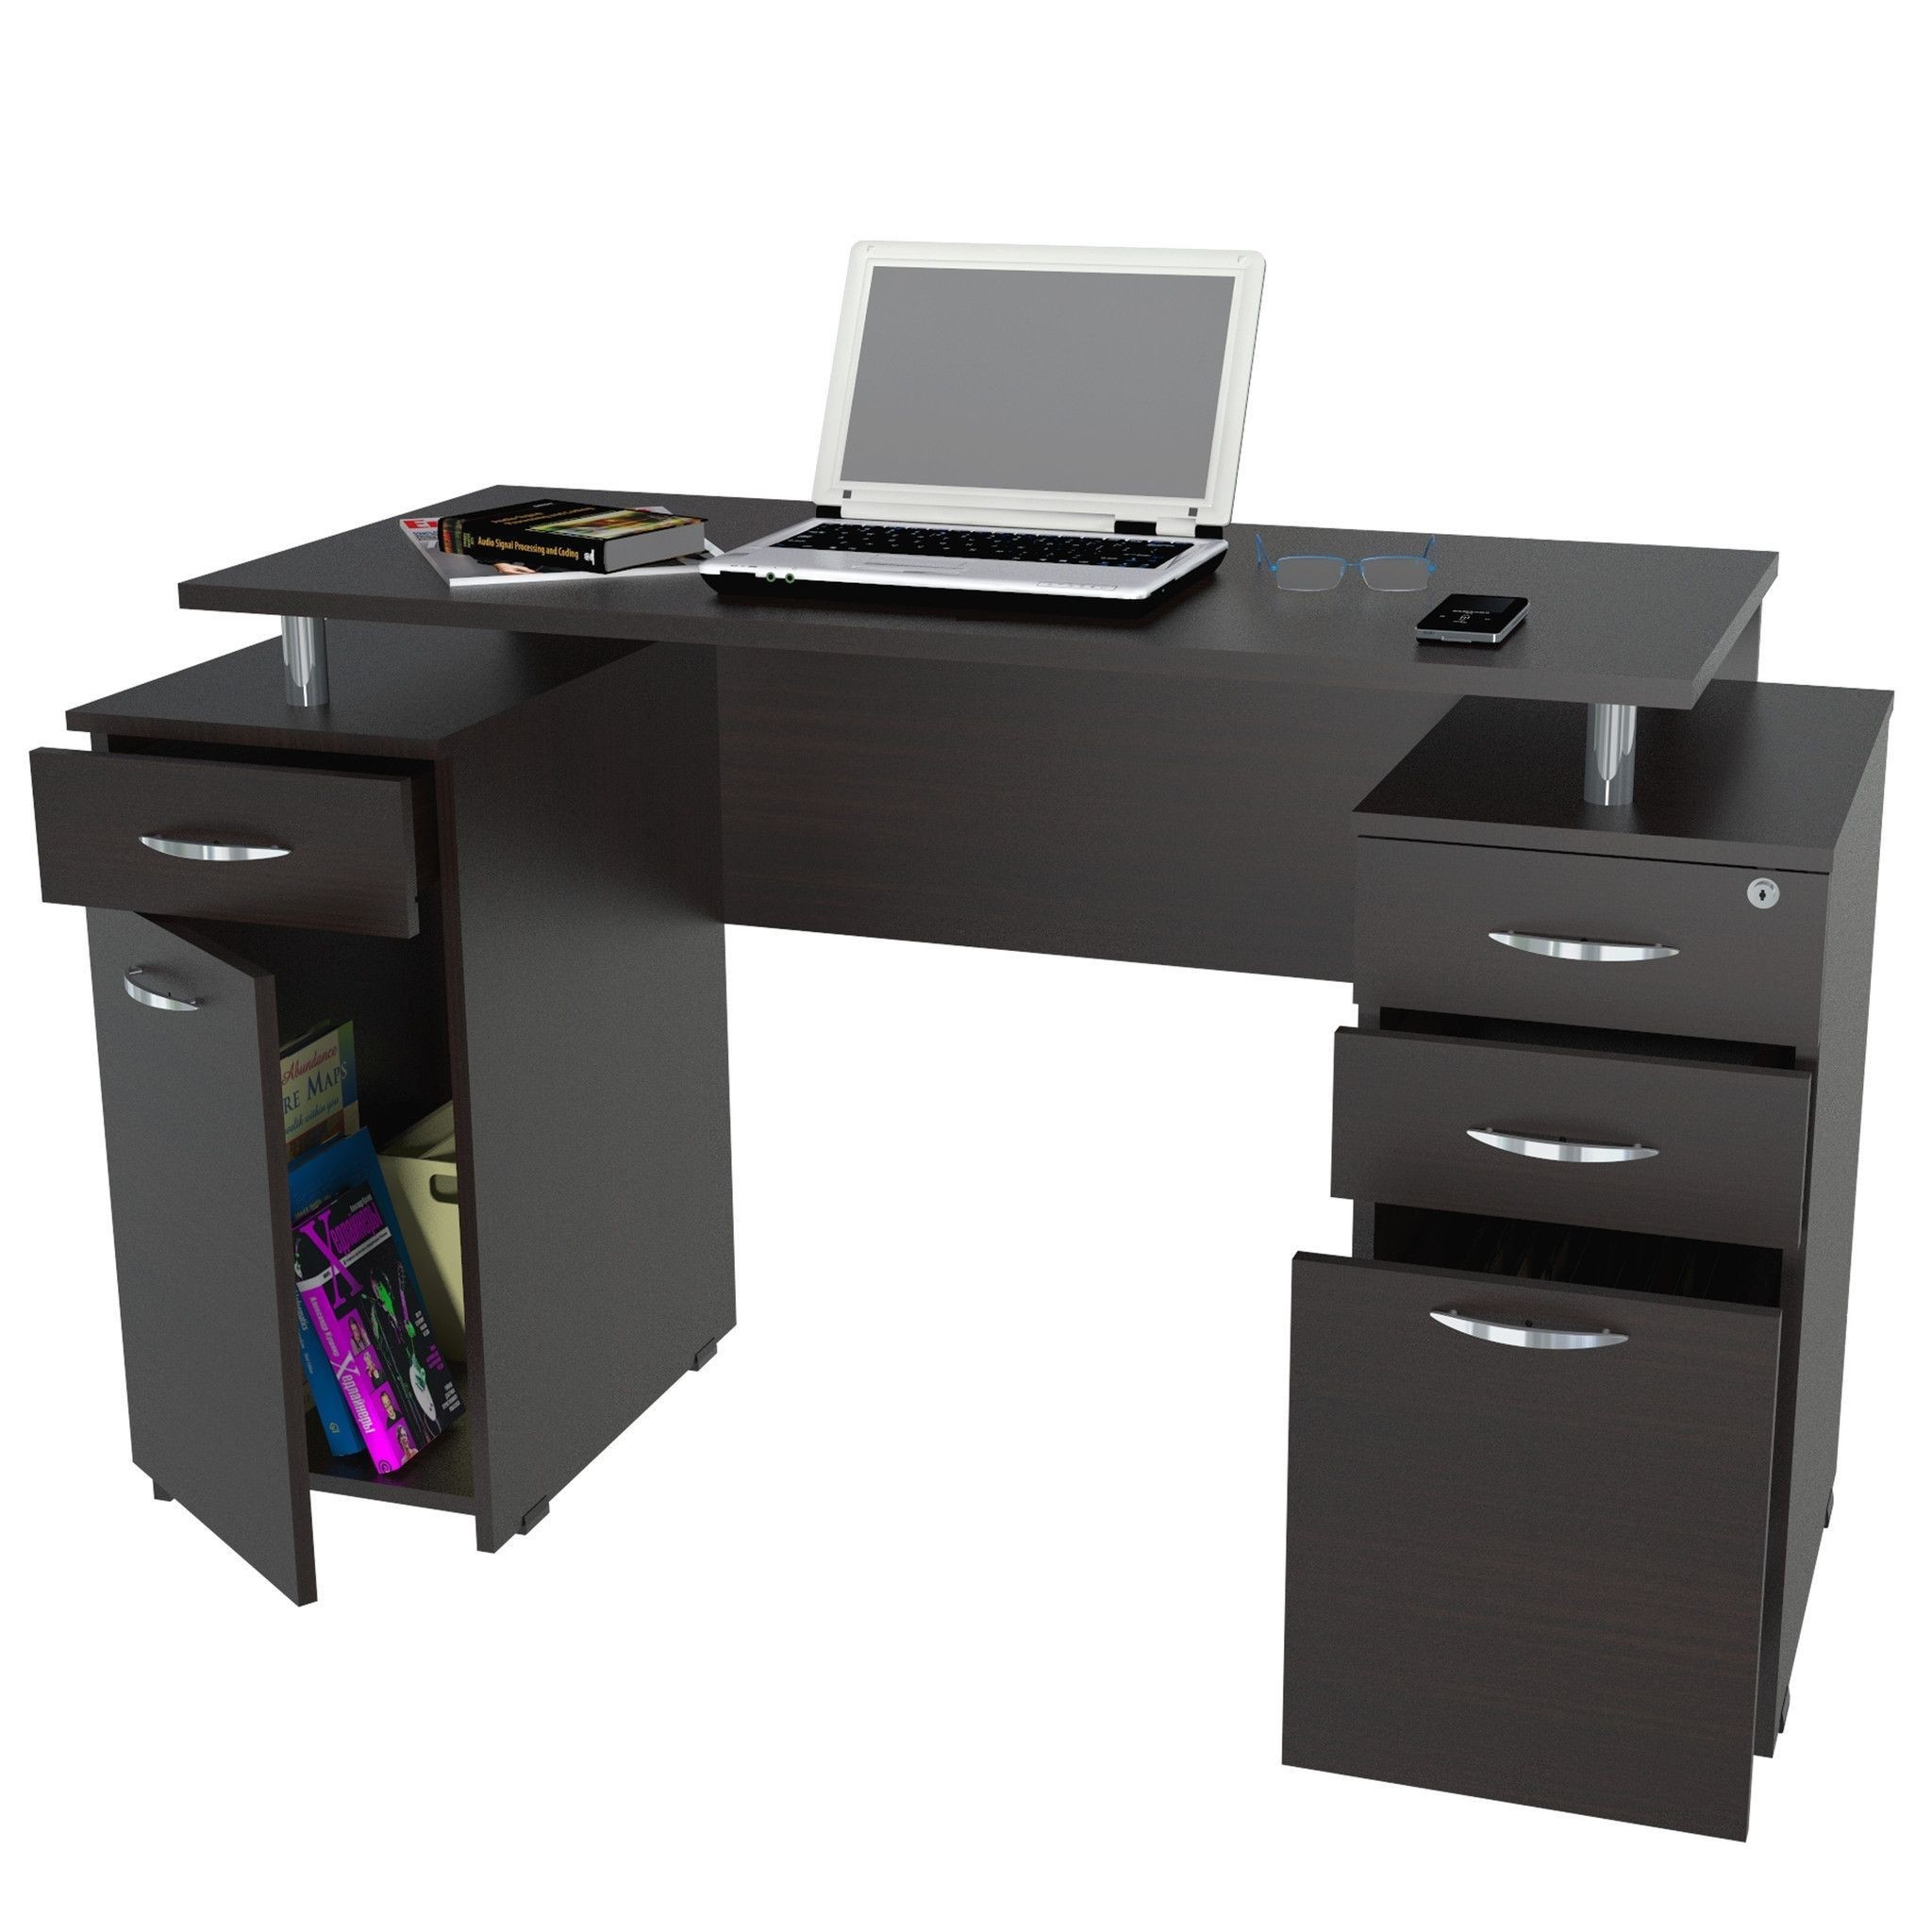 Details about   Crafts and Comfort MILANO Home & Office Computer Desk with 3 lockable drawers 